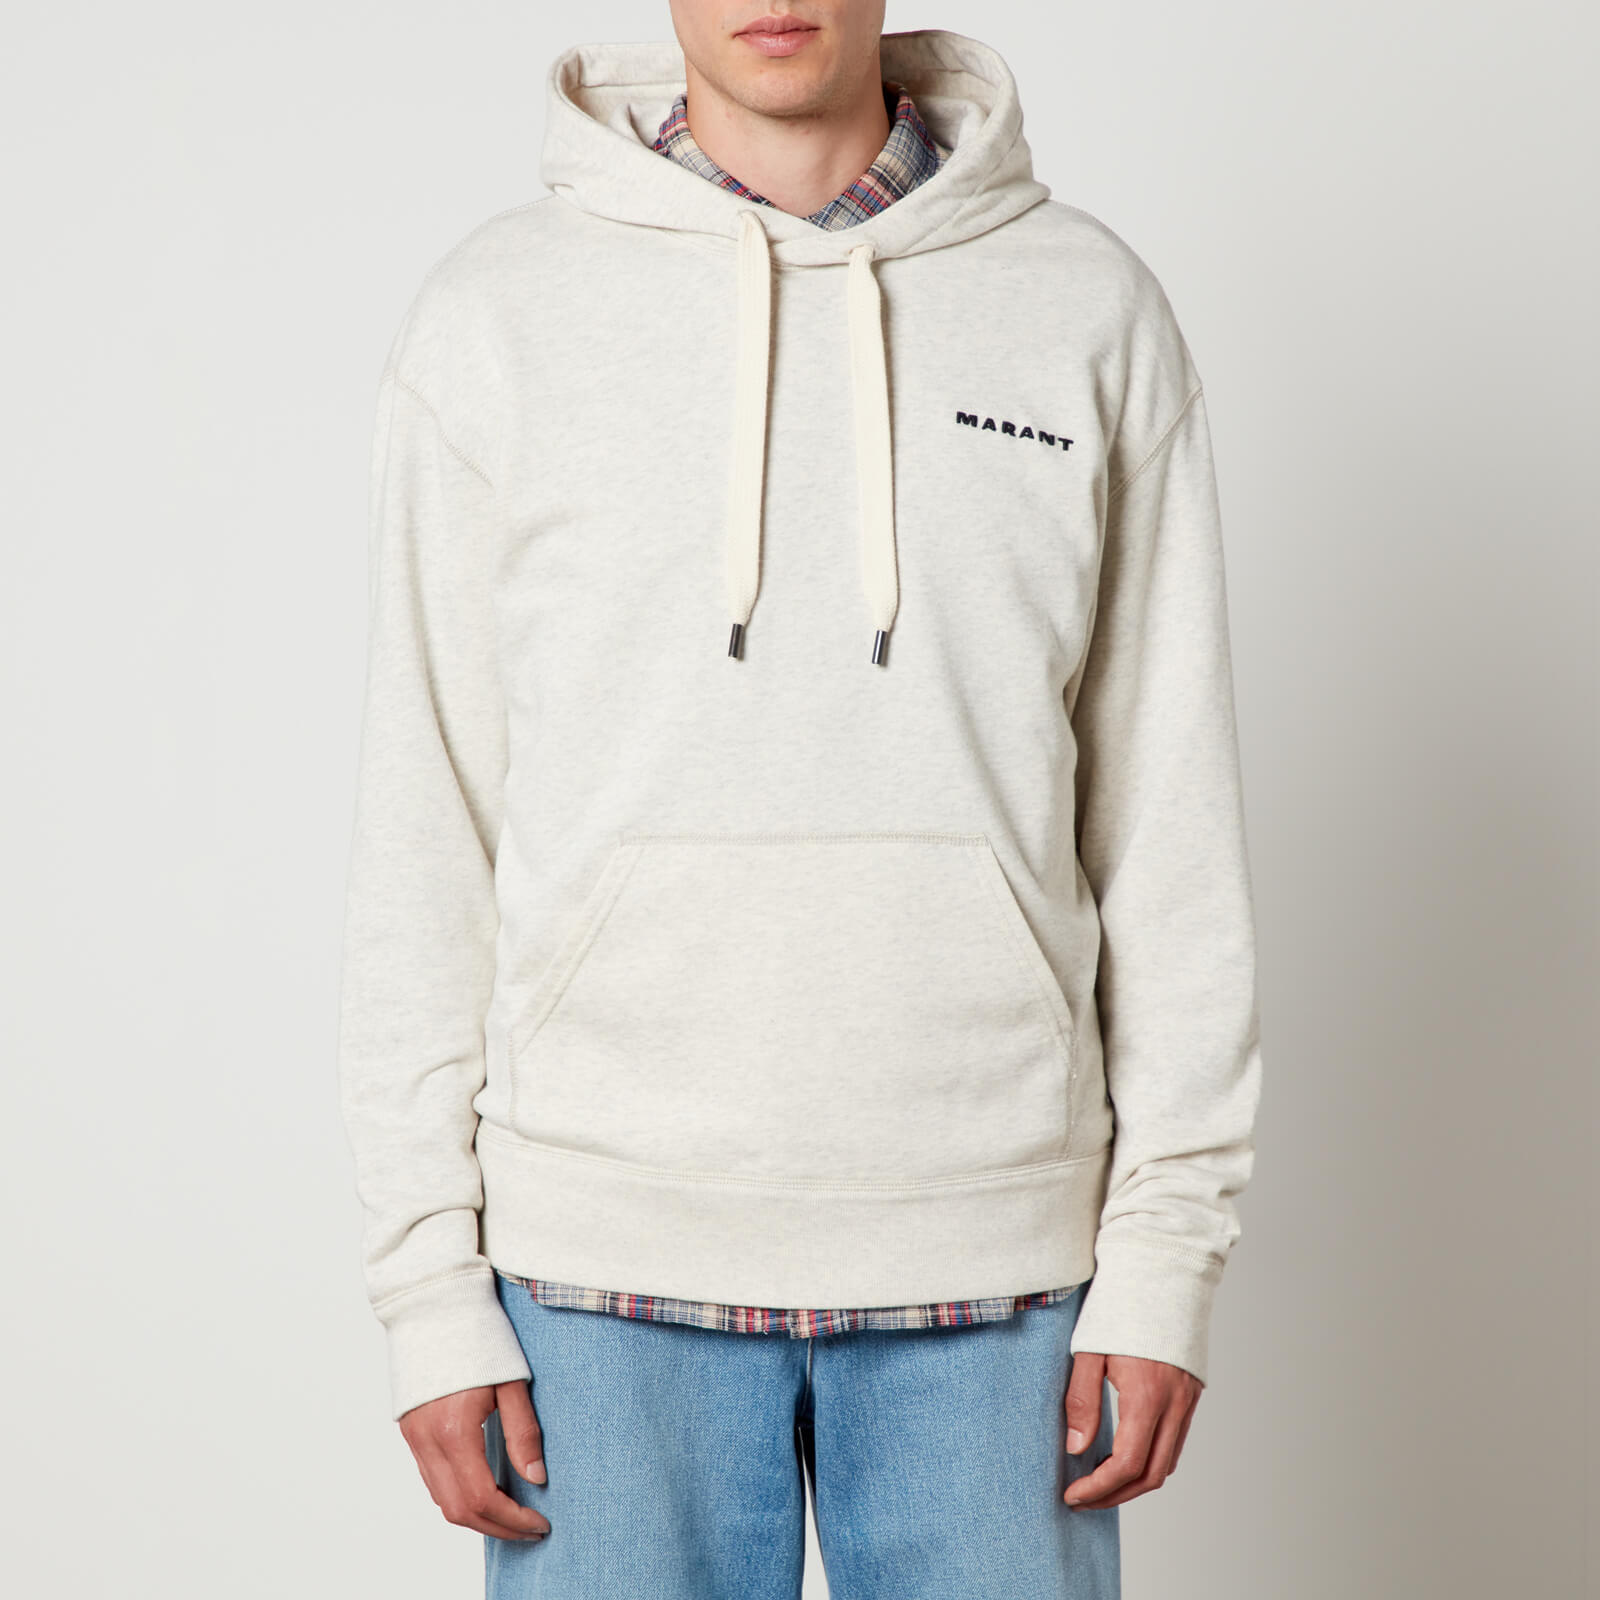 MARANT Marcello Loopback Cotton-Blend Hoodie - S